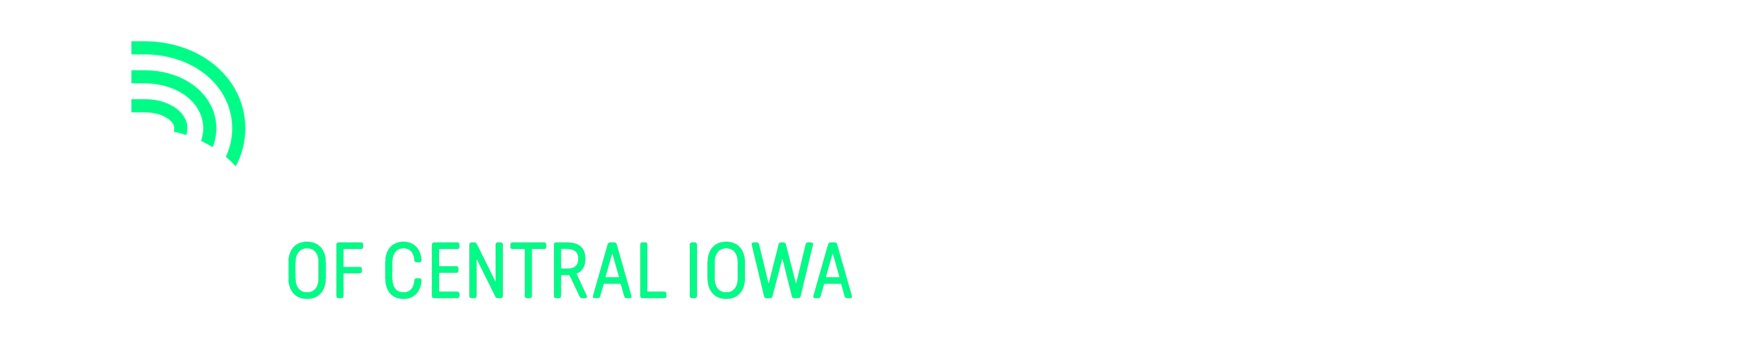 Big Brothers Big Sisters of Central Iowa